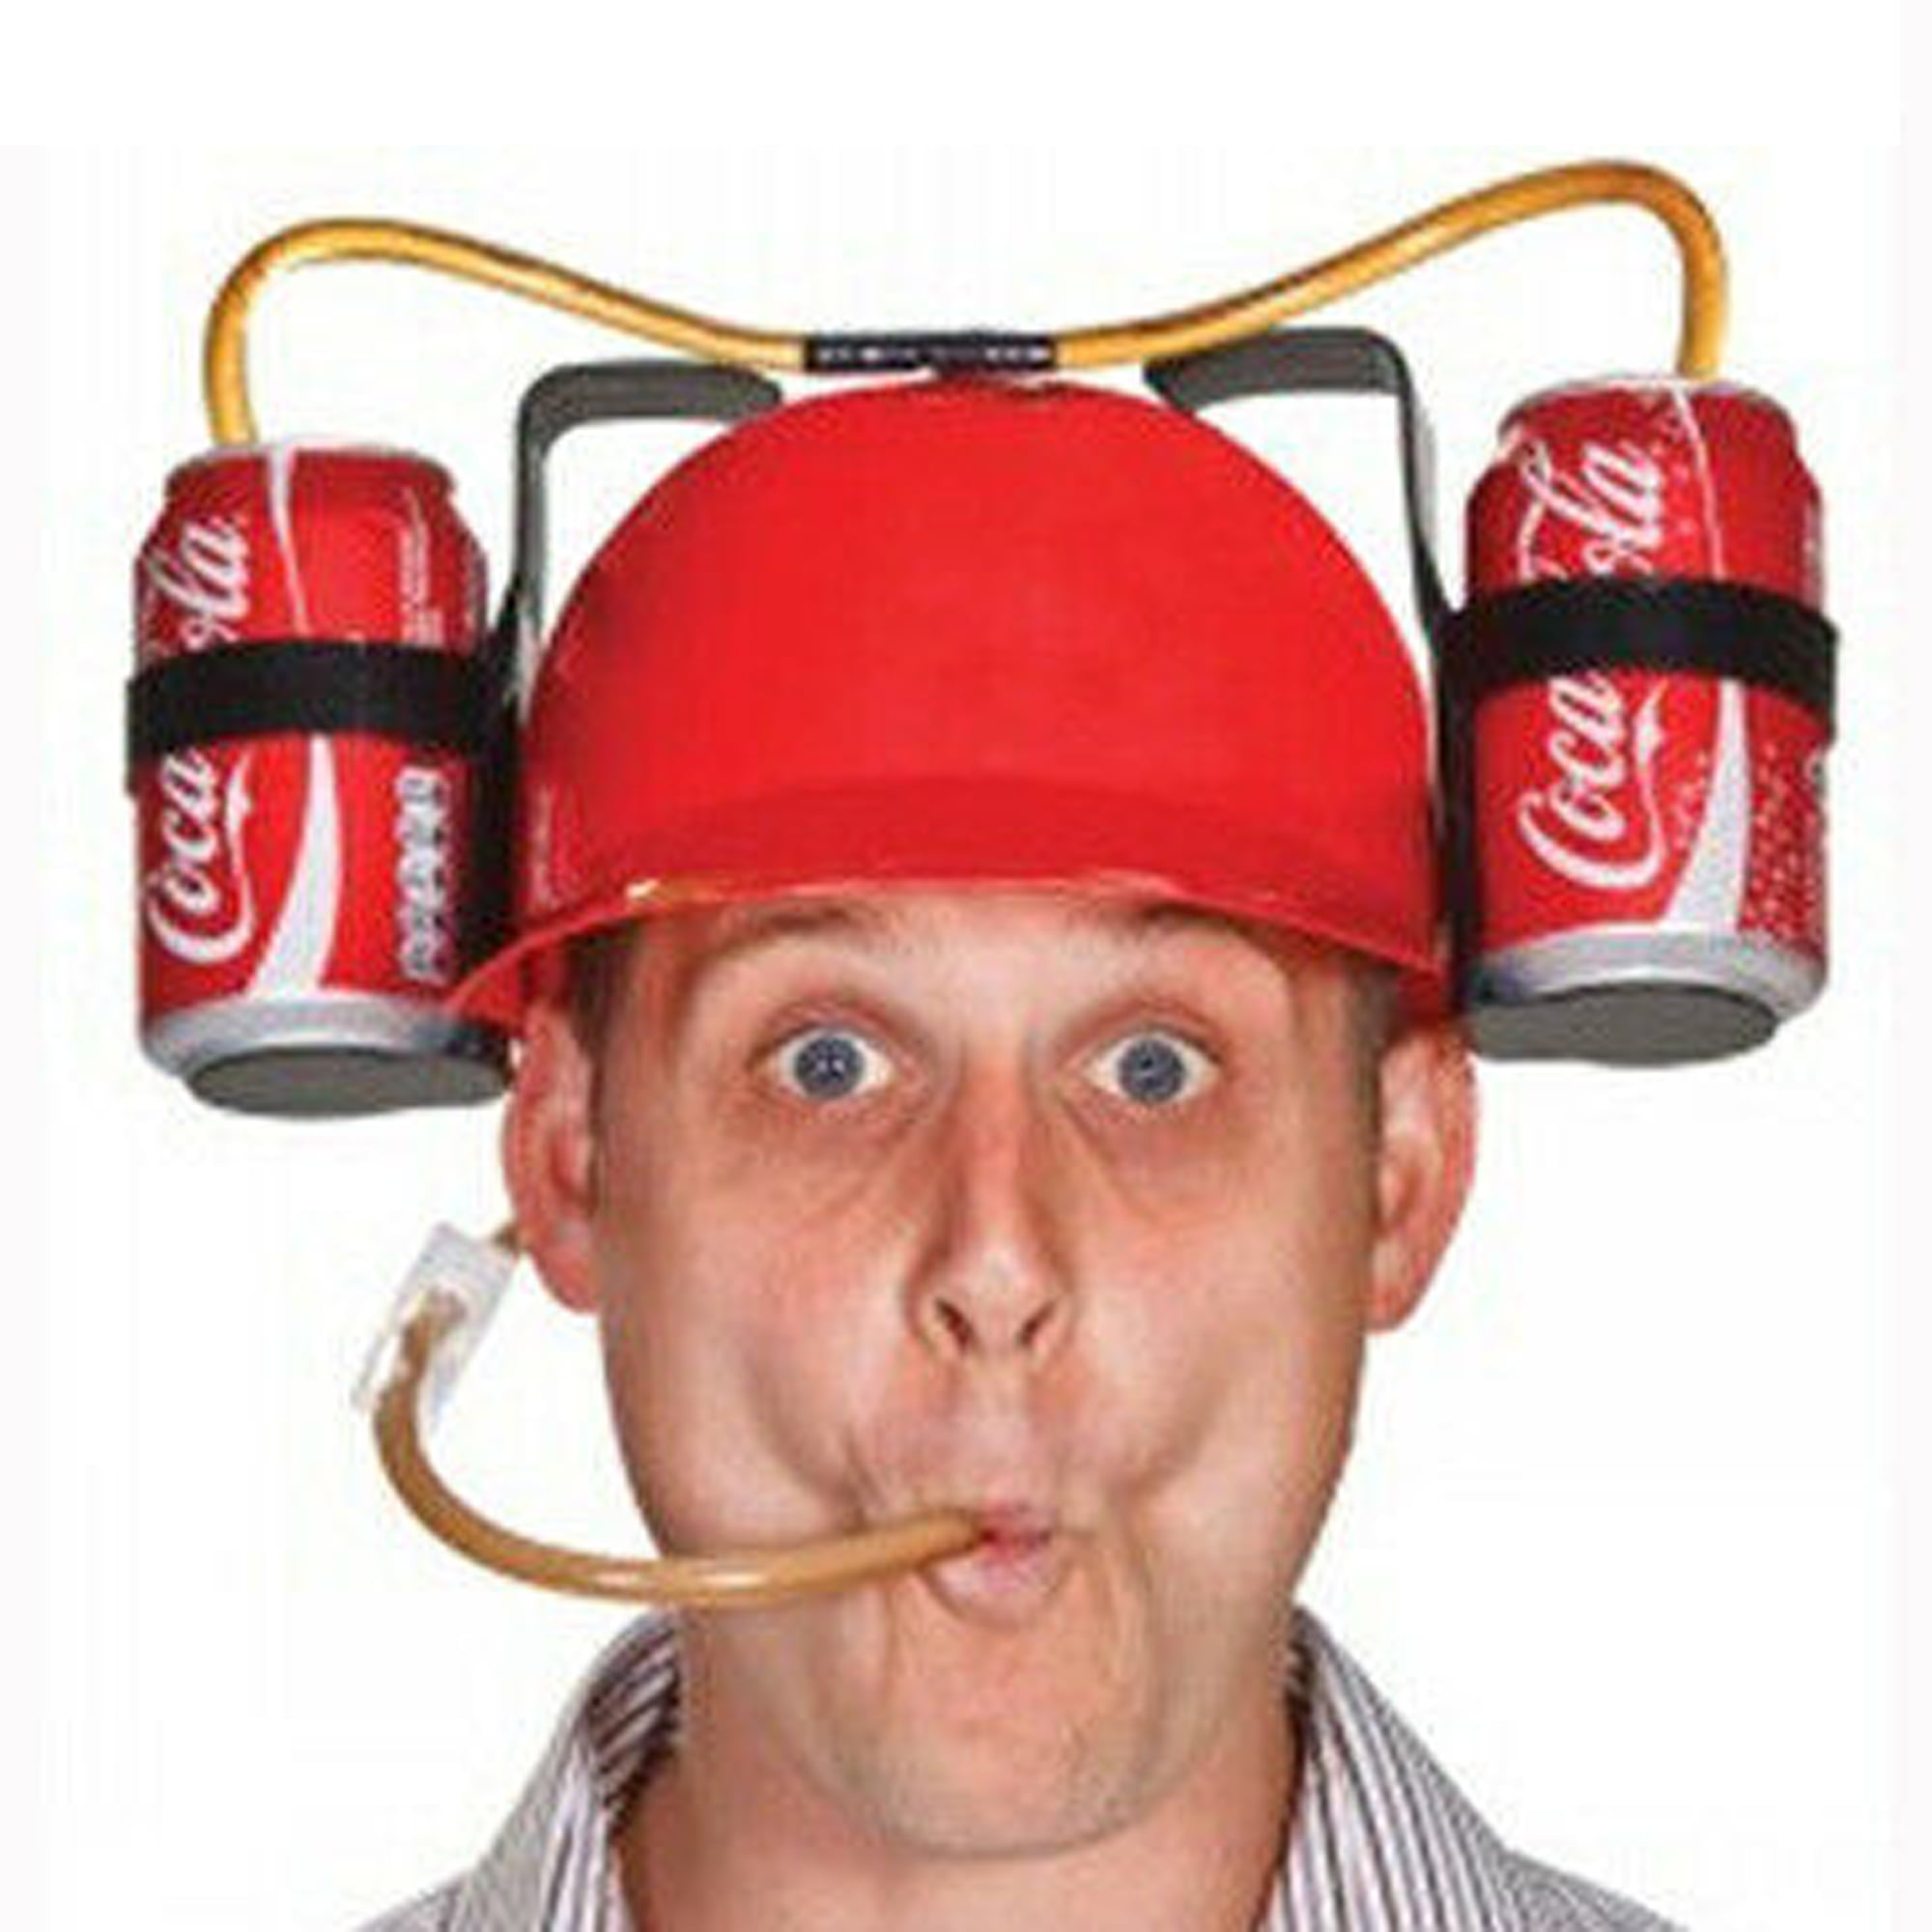 Soda & Beer Hat - Guzzler Helmet Party Drinking Cap, Novelty Gag Gift with  Attached Straw, Funny Hat - Hats - New York, New York